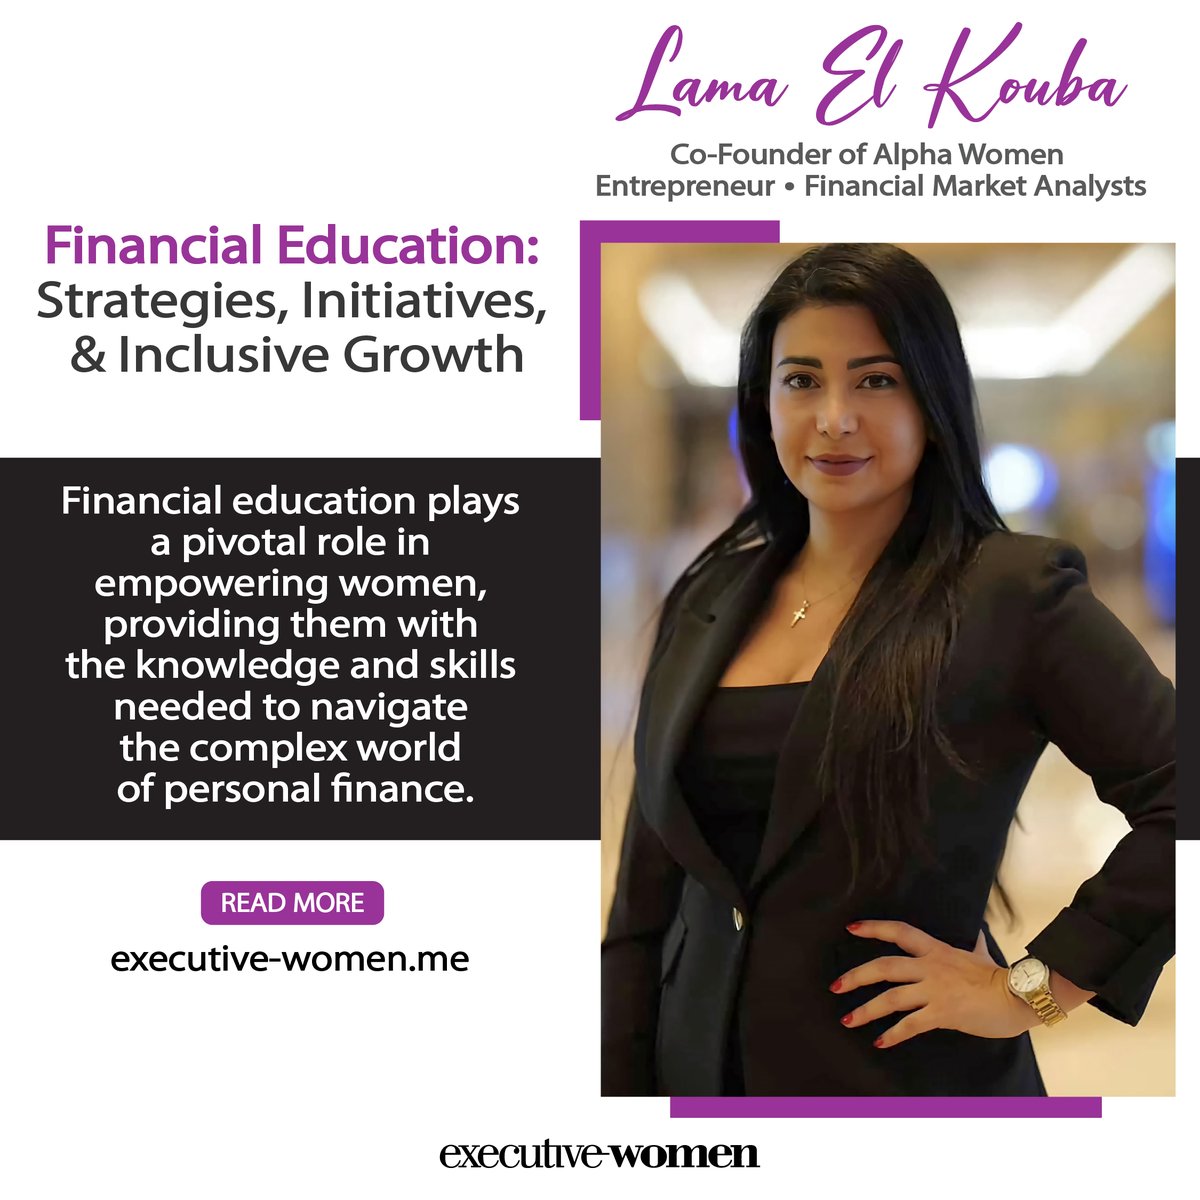 Lama El Kouba discusses how financial education has lots of advantages for women.

Read the full article here: executive-women.me/financial-educ…

#executivewomen #womenempowerment #financialeducation #LamaElKouba #article #finance #education #alphawomen #ecolearn